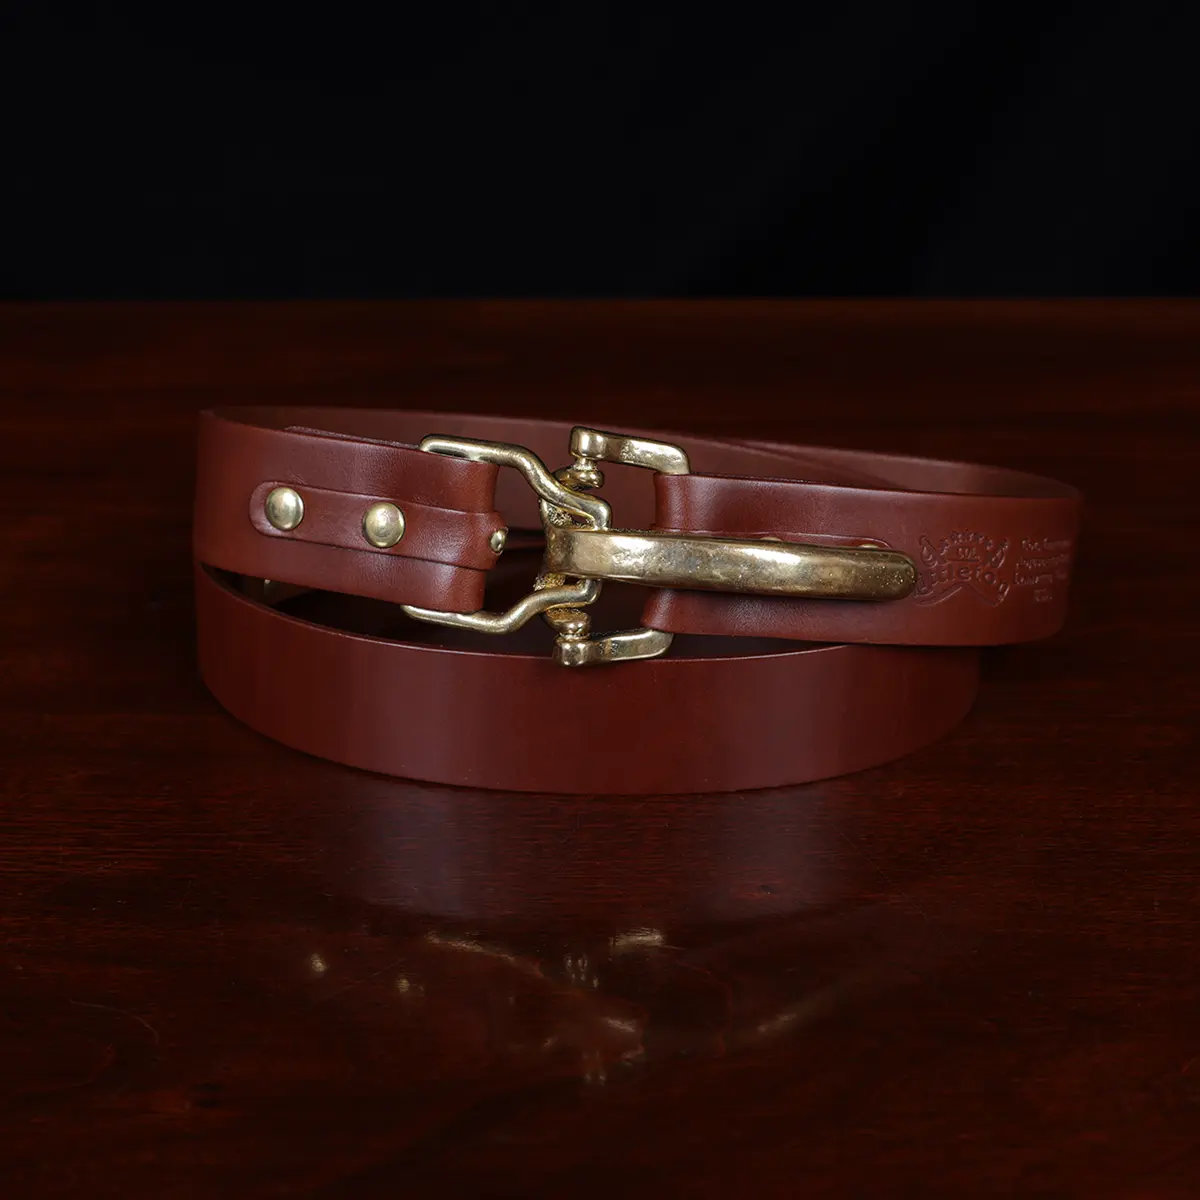 Louis Vuitton Mens Vintage Belt, Serious Buyers Only for Sale in